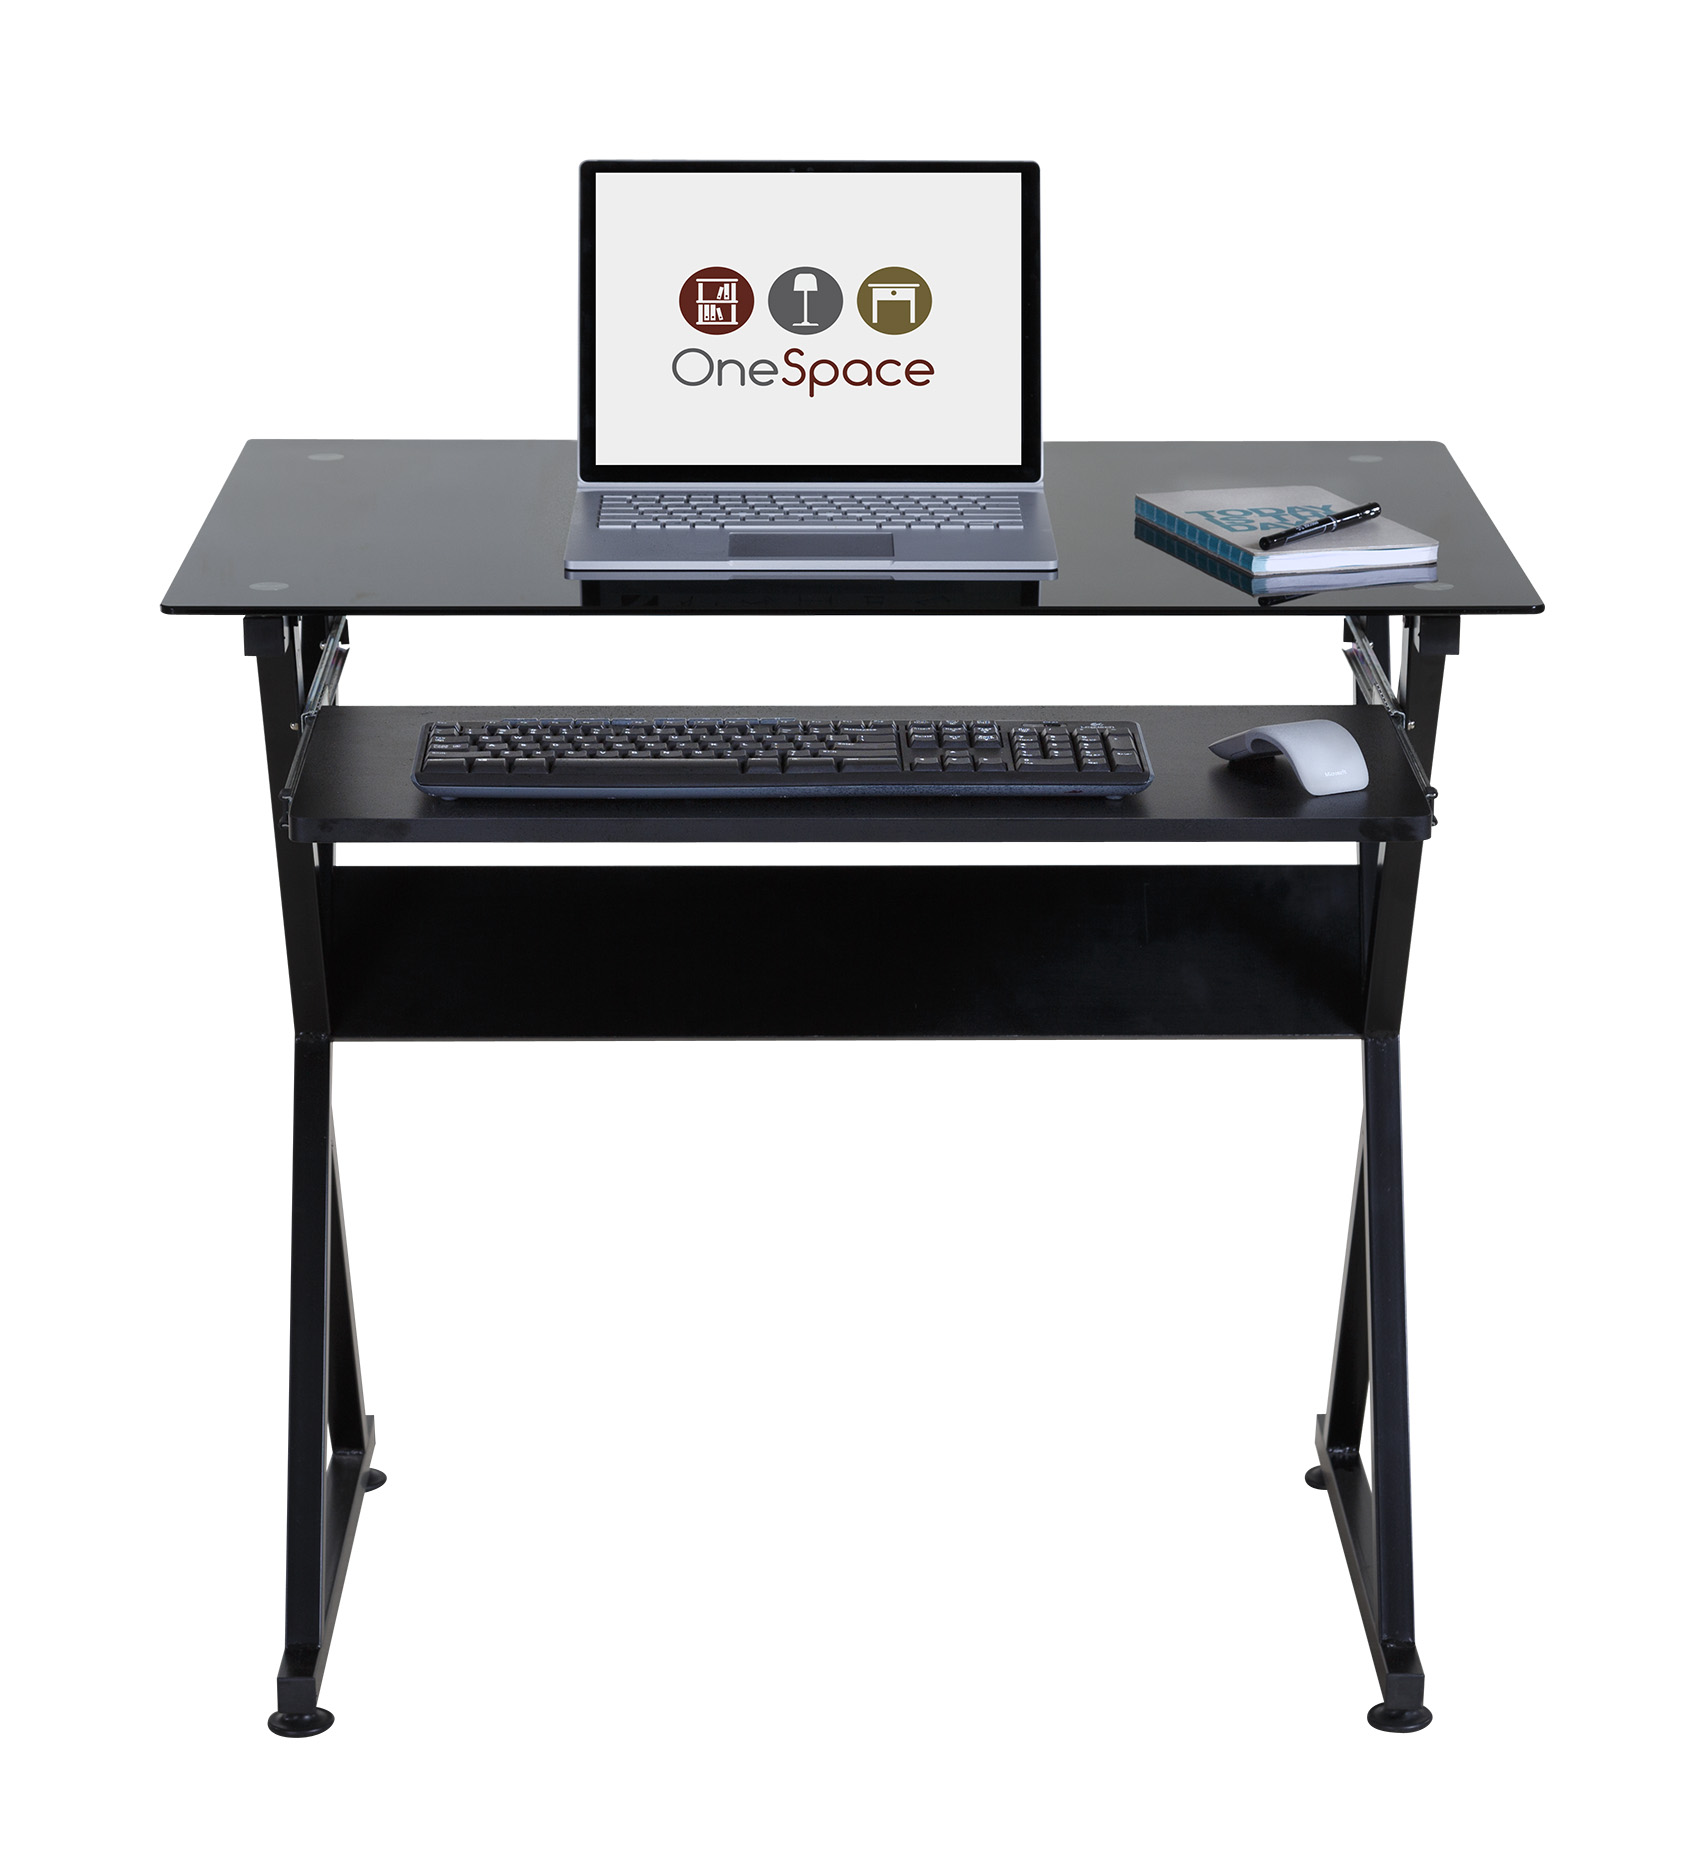 OneSpace 50-JN1205 Ultramodern Glass Computer Desk, with Pull-Out Keyboard Tray, Black - image 3 of 9